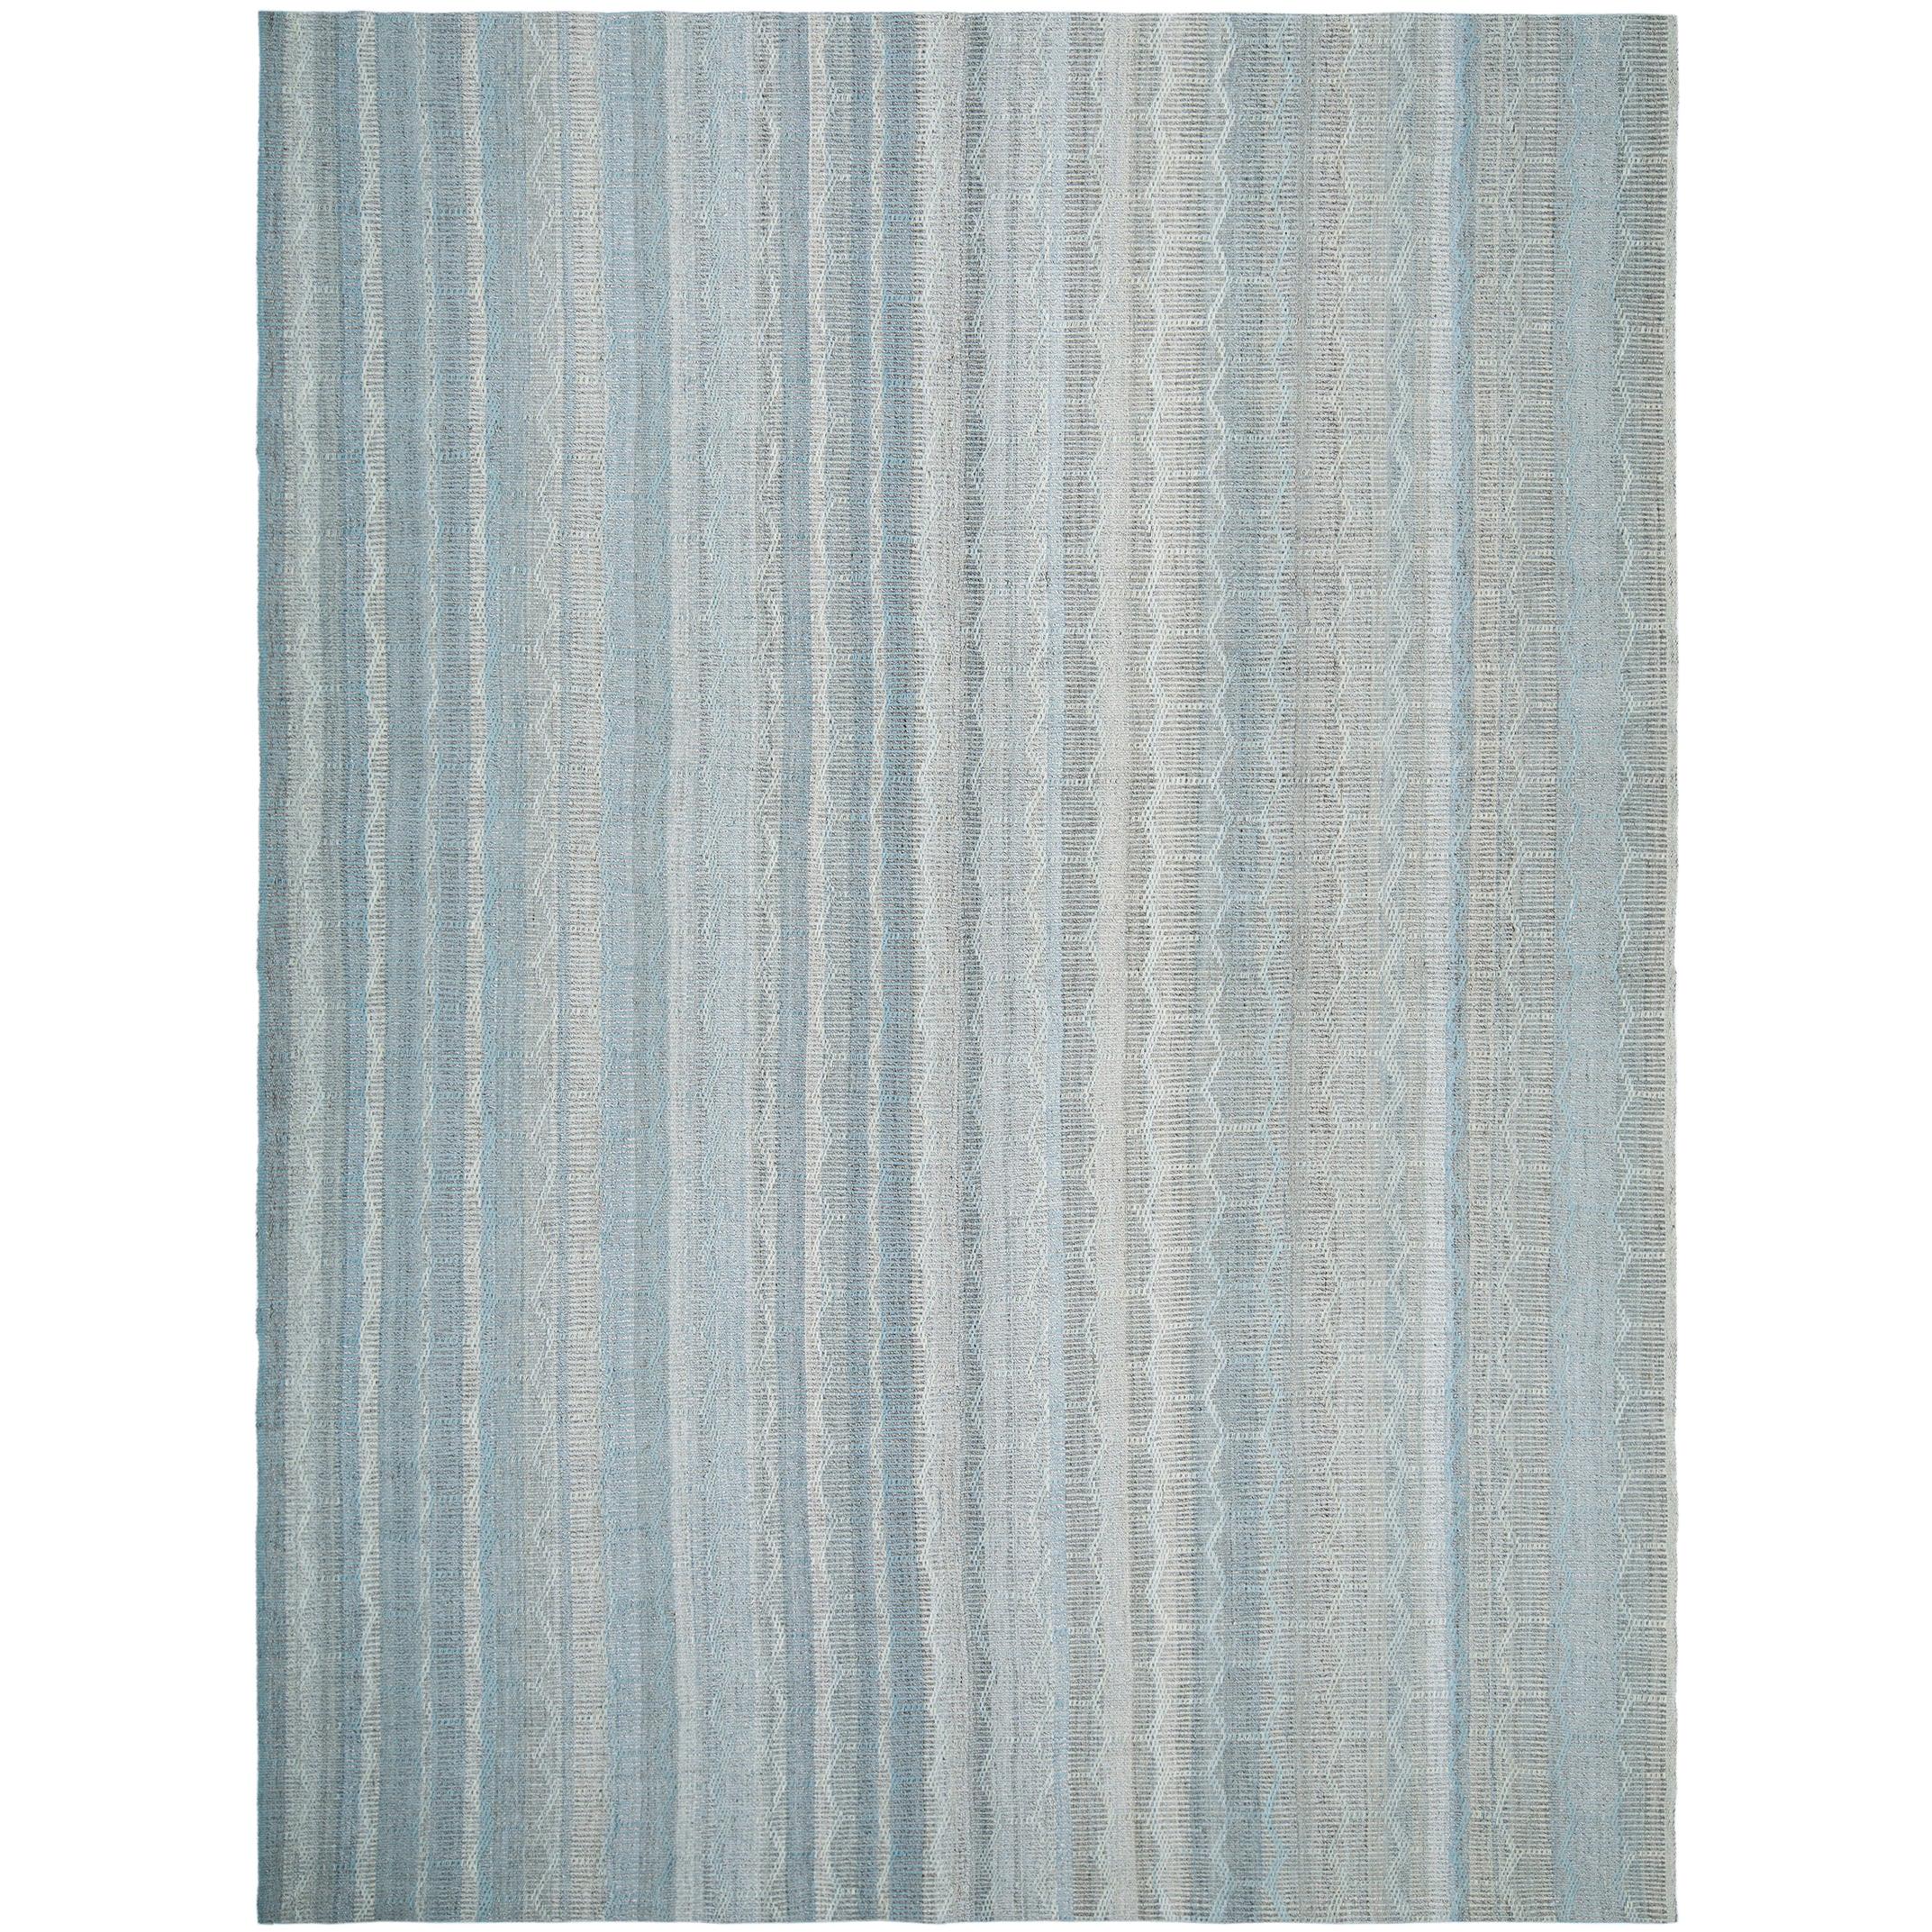 Mid-Century Modern Handwoven Flat-Weave Honeycomb Pattern Rug in Grey and Blue